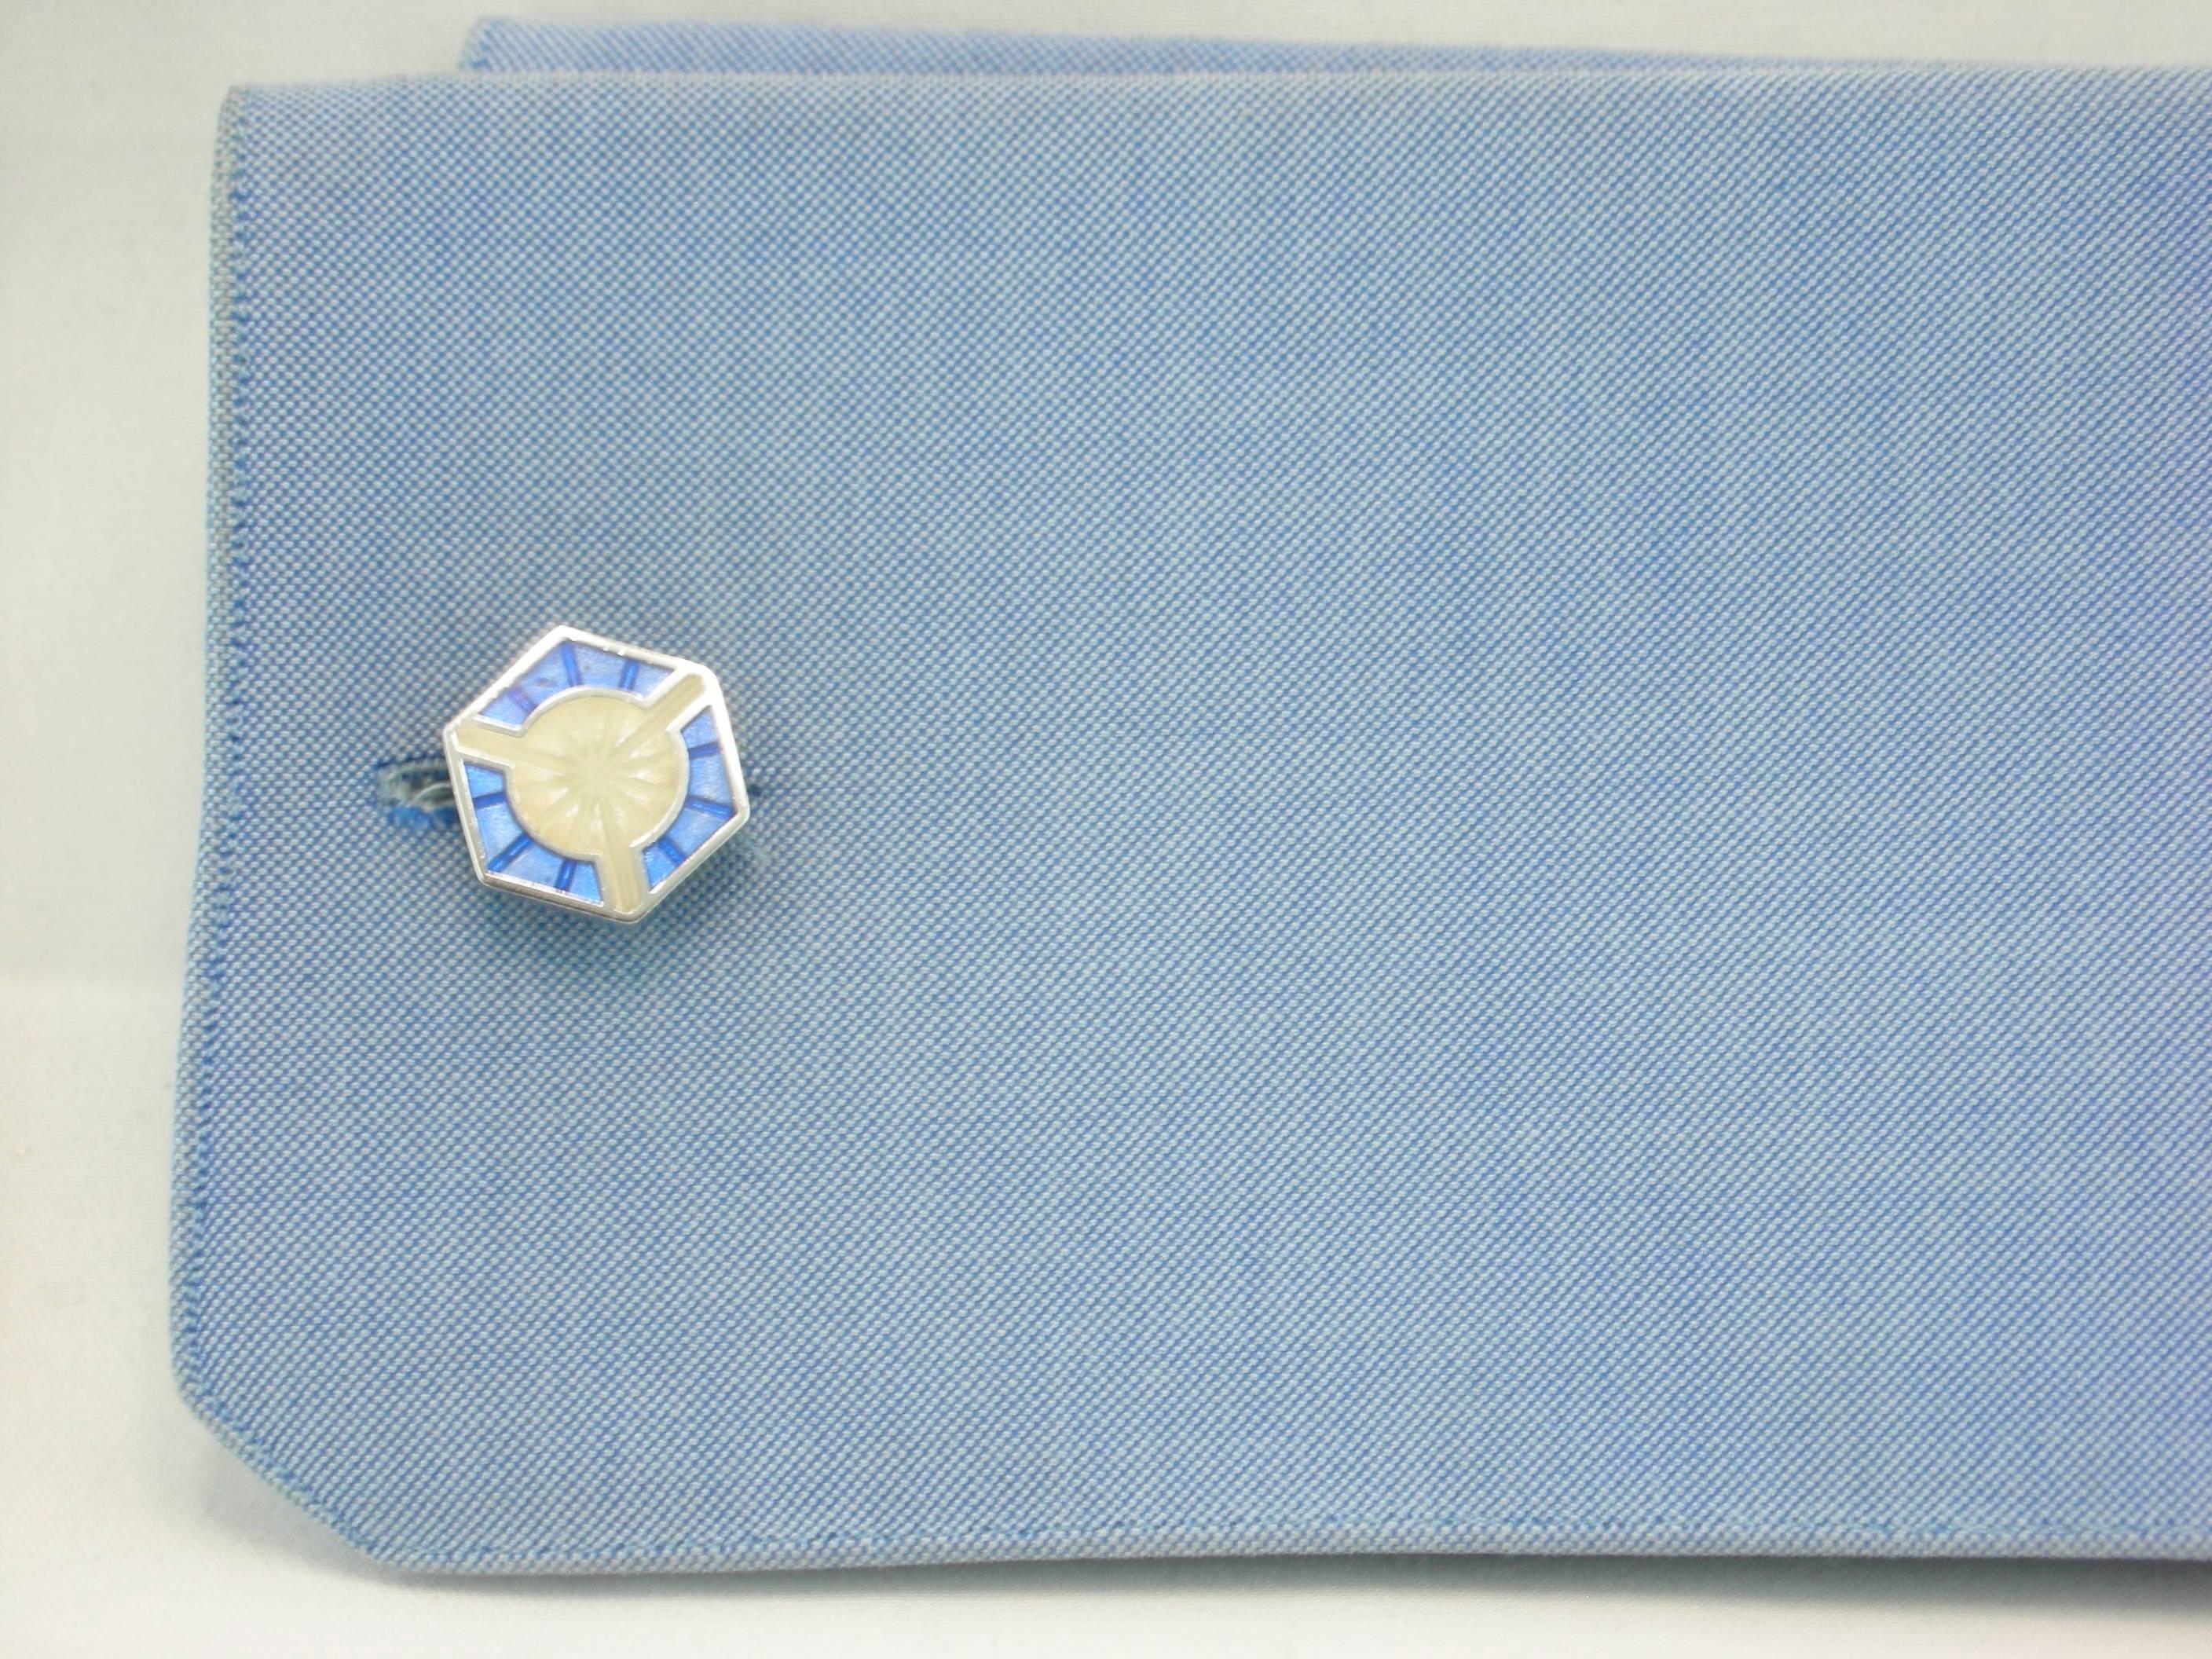 Jona design collection hexagonal-shaped 925/°°° sterling silver cufflinks with blue & white enamel. Marked JONA.

All of our jewelry is new and has never been previously owned or worn.